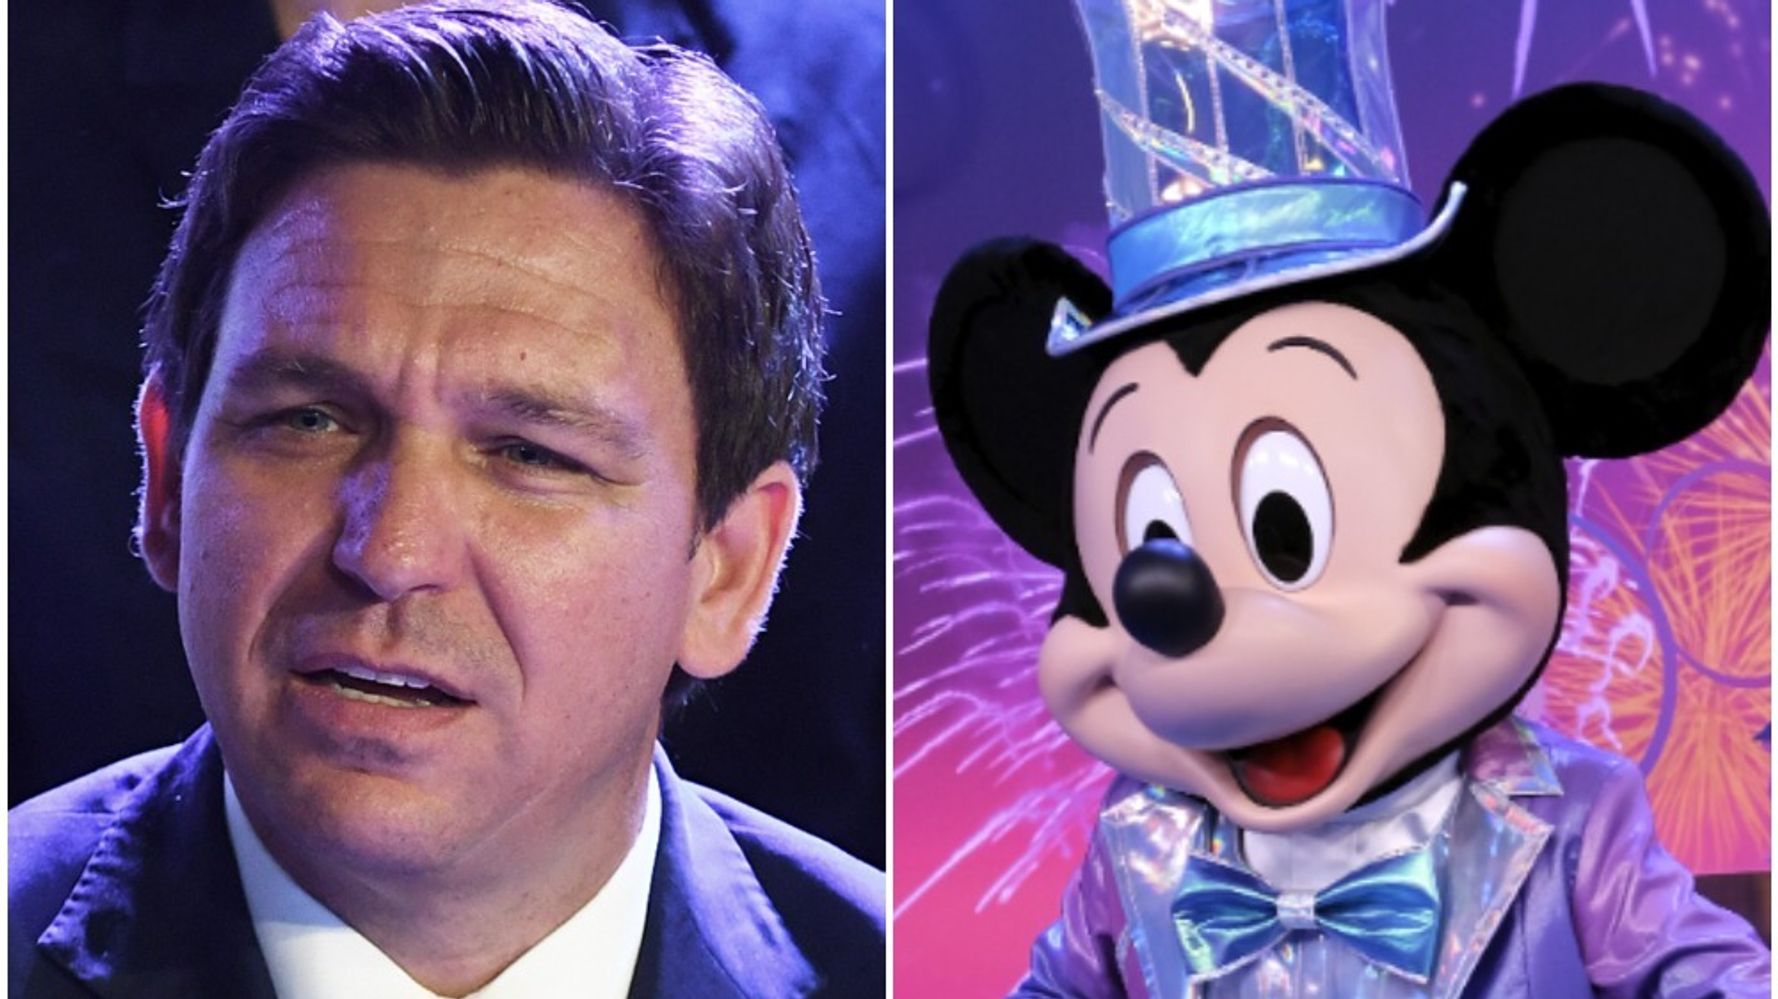 Florida’s governor signs law revoking Disney’s self-governing powers